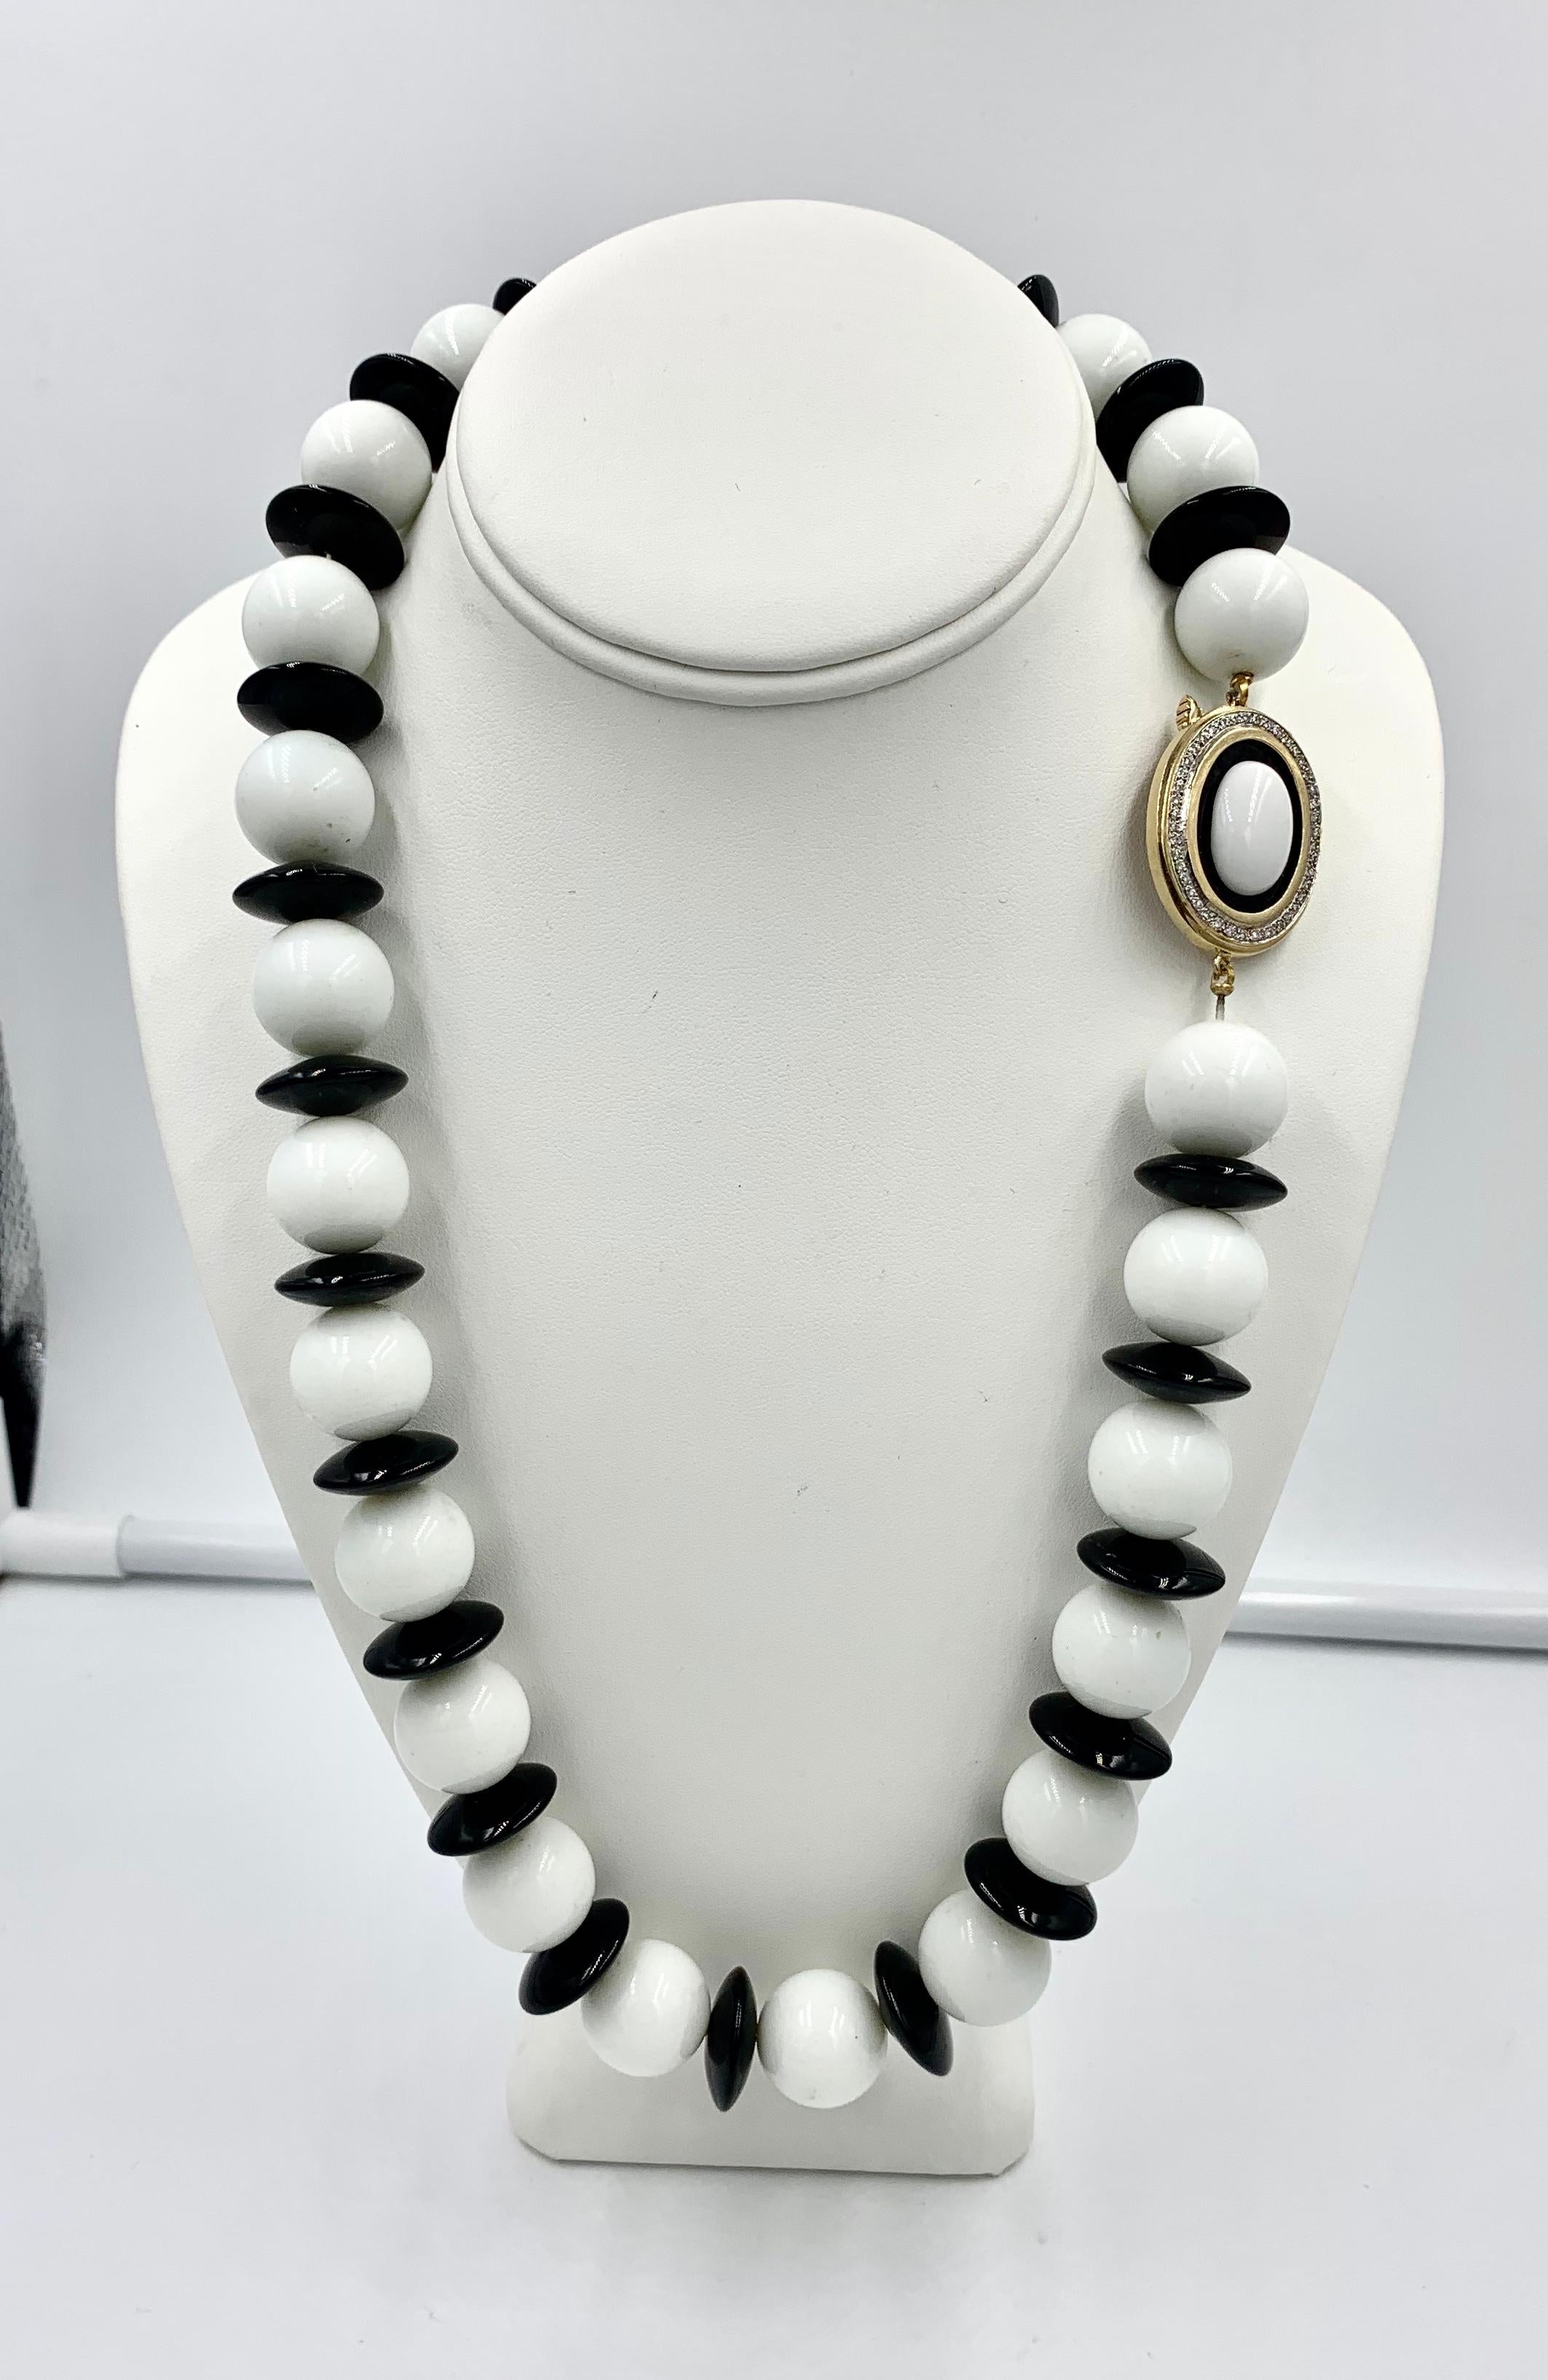 This is one of the finest and most dramatic Black and White Onyx and Diamond Necklaces we have seen.  The large White Onyx beads alternate with smooth Black Onyx discs to create a cascade of incredible jewels.  The clasp features a white onyx